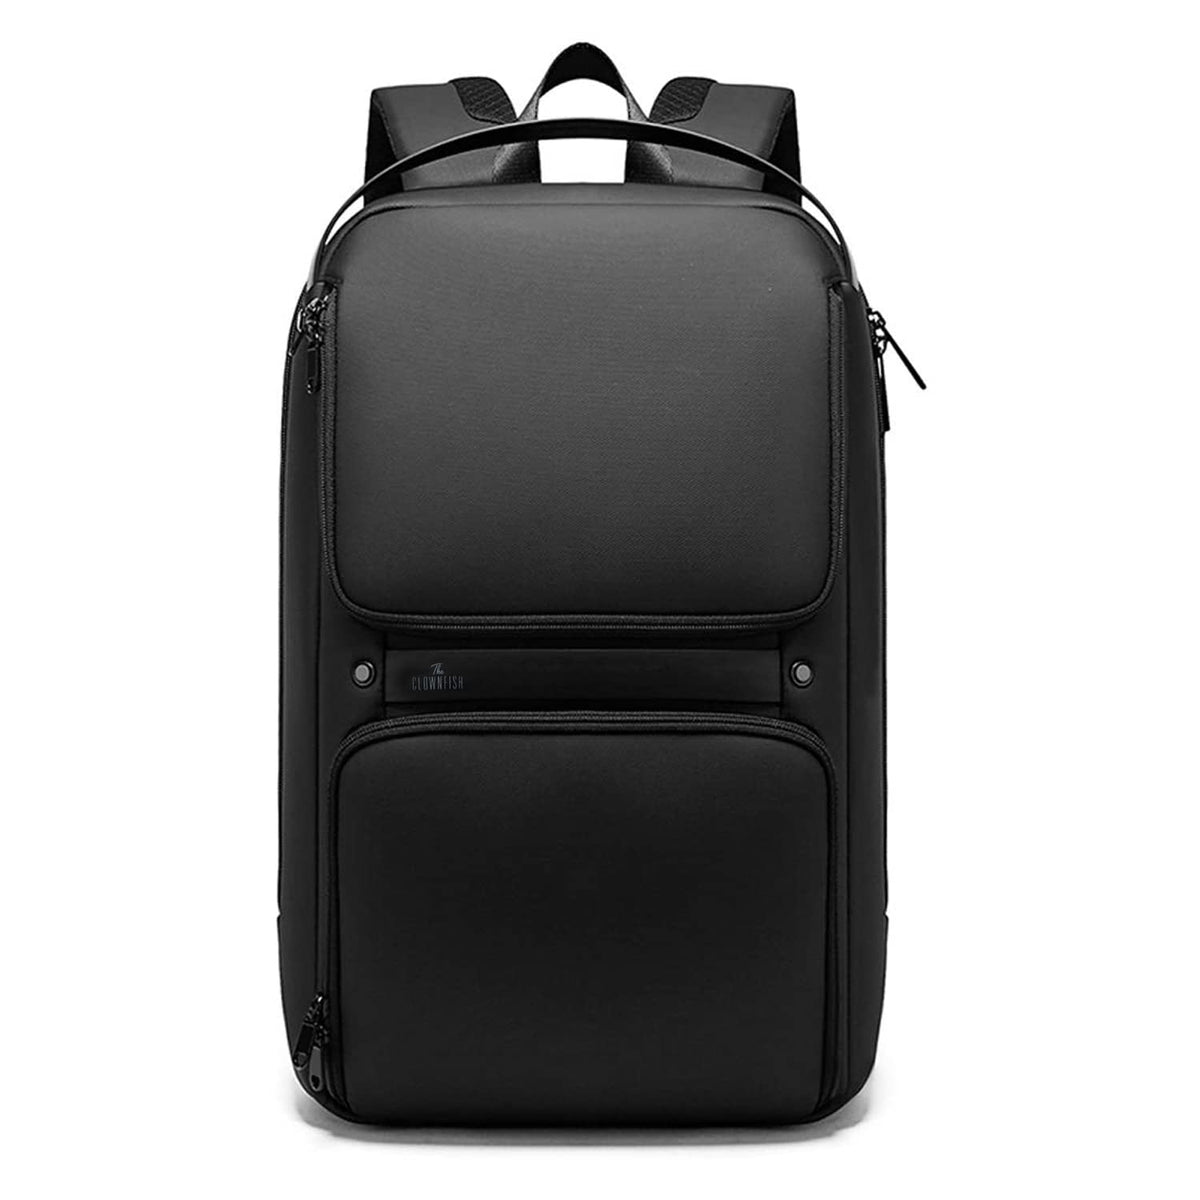 THE CLOWNFISH Water Resistant Anti-Theft Unisex Travel Laptop Backpack with USB Charging Port (Black)